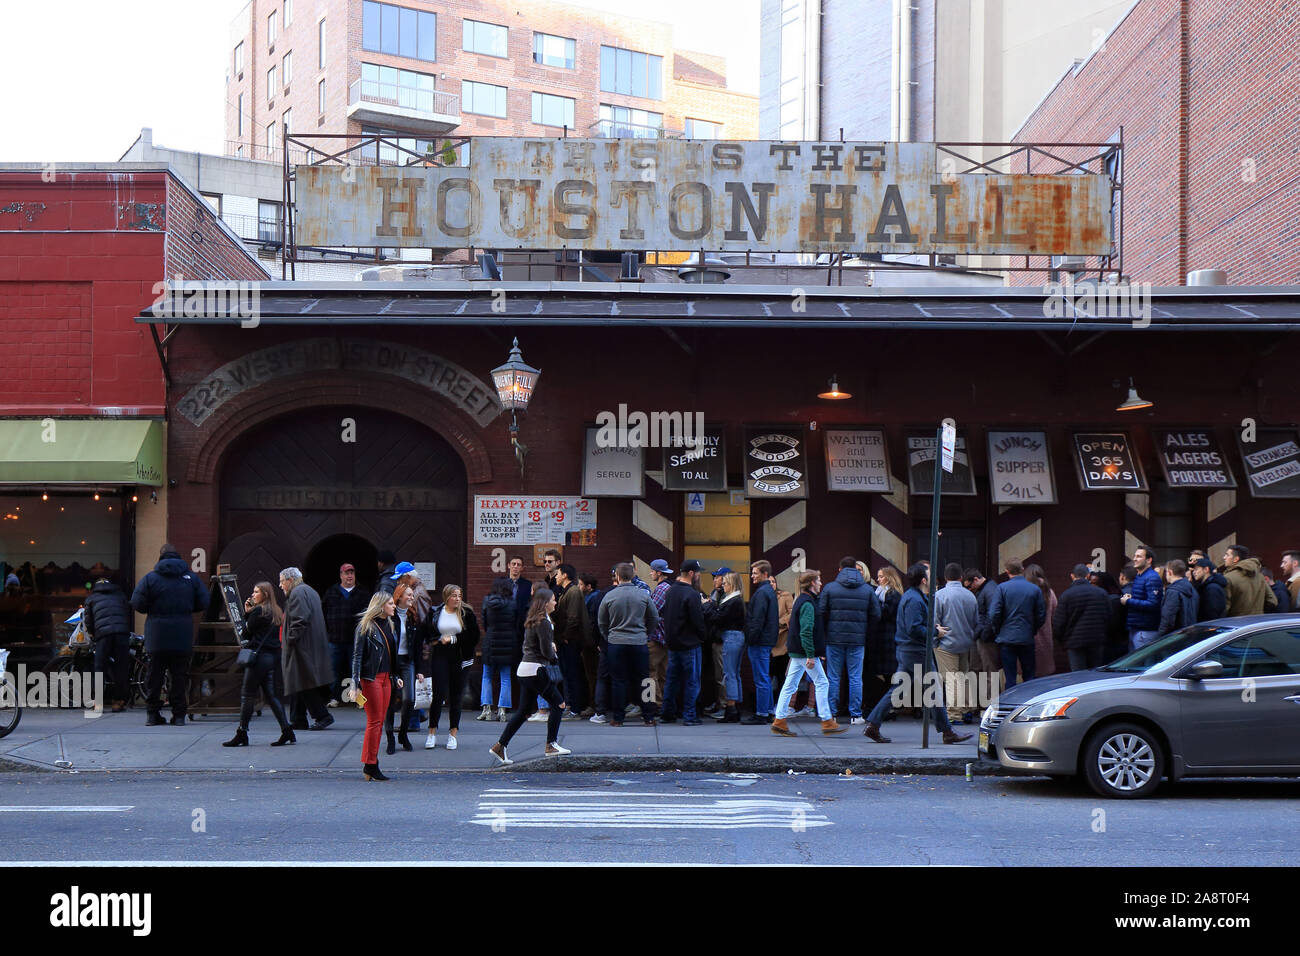 Houston Hall, 222 West Houston Street, New York, NY.  exterior storefront of a beer hall in the SoHo area of Manhattan. Stock Photo